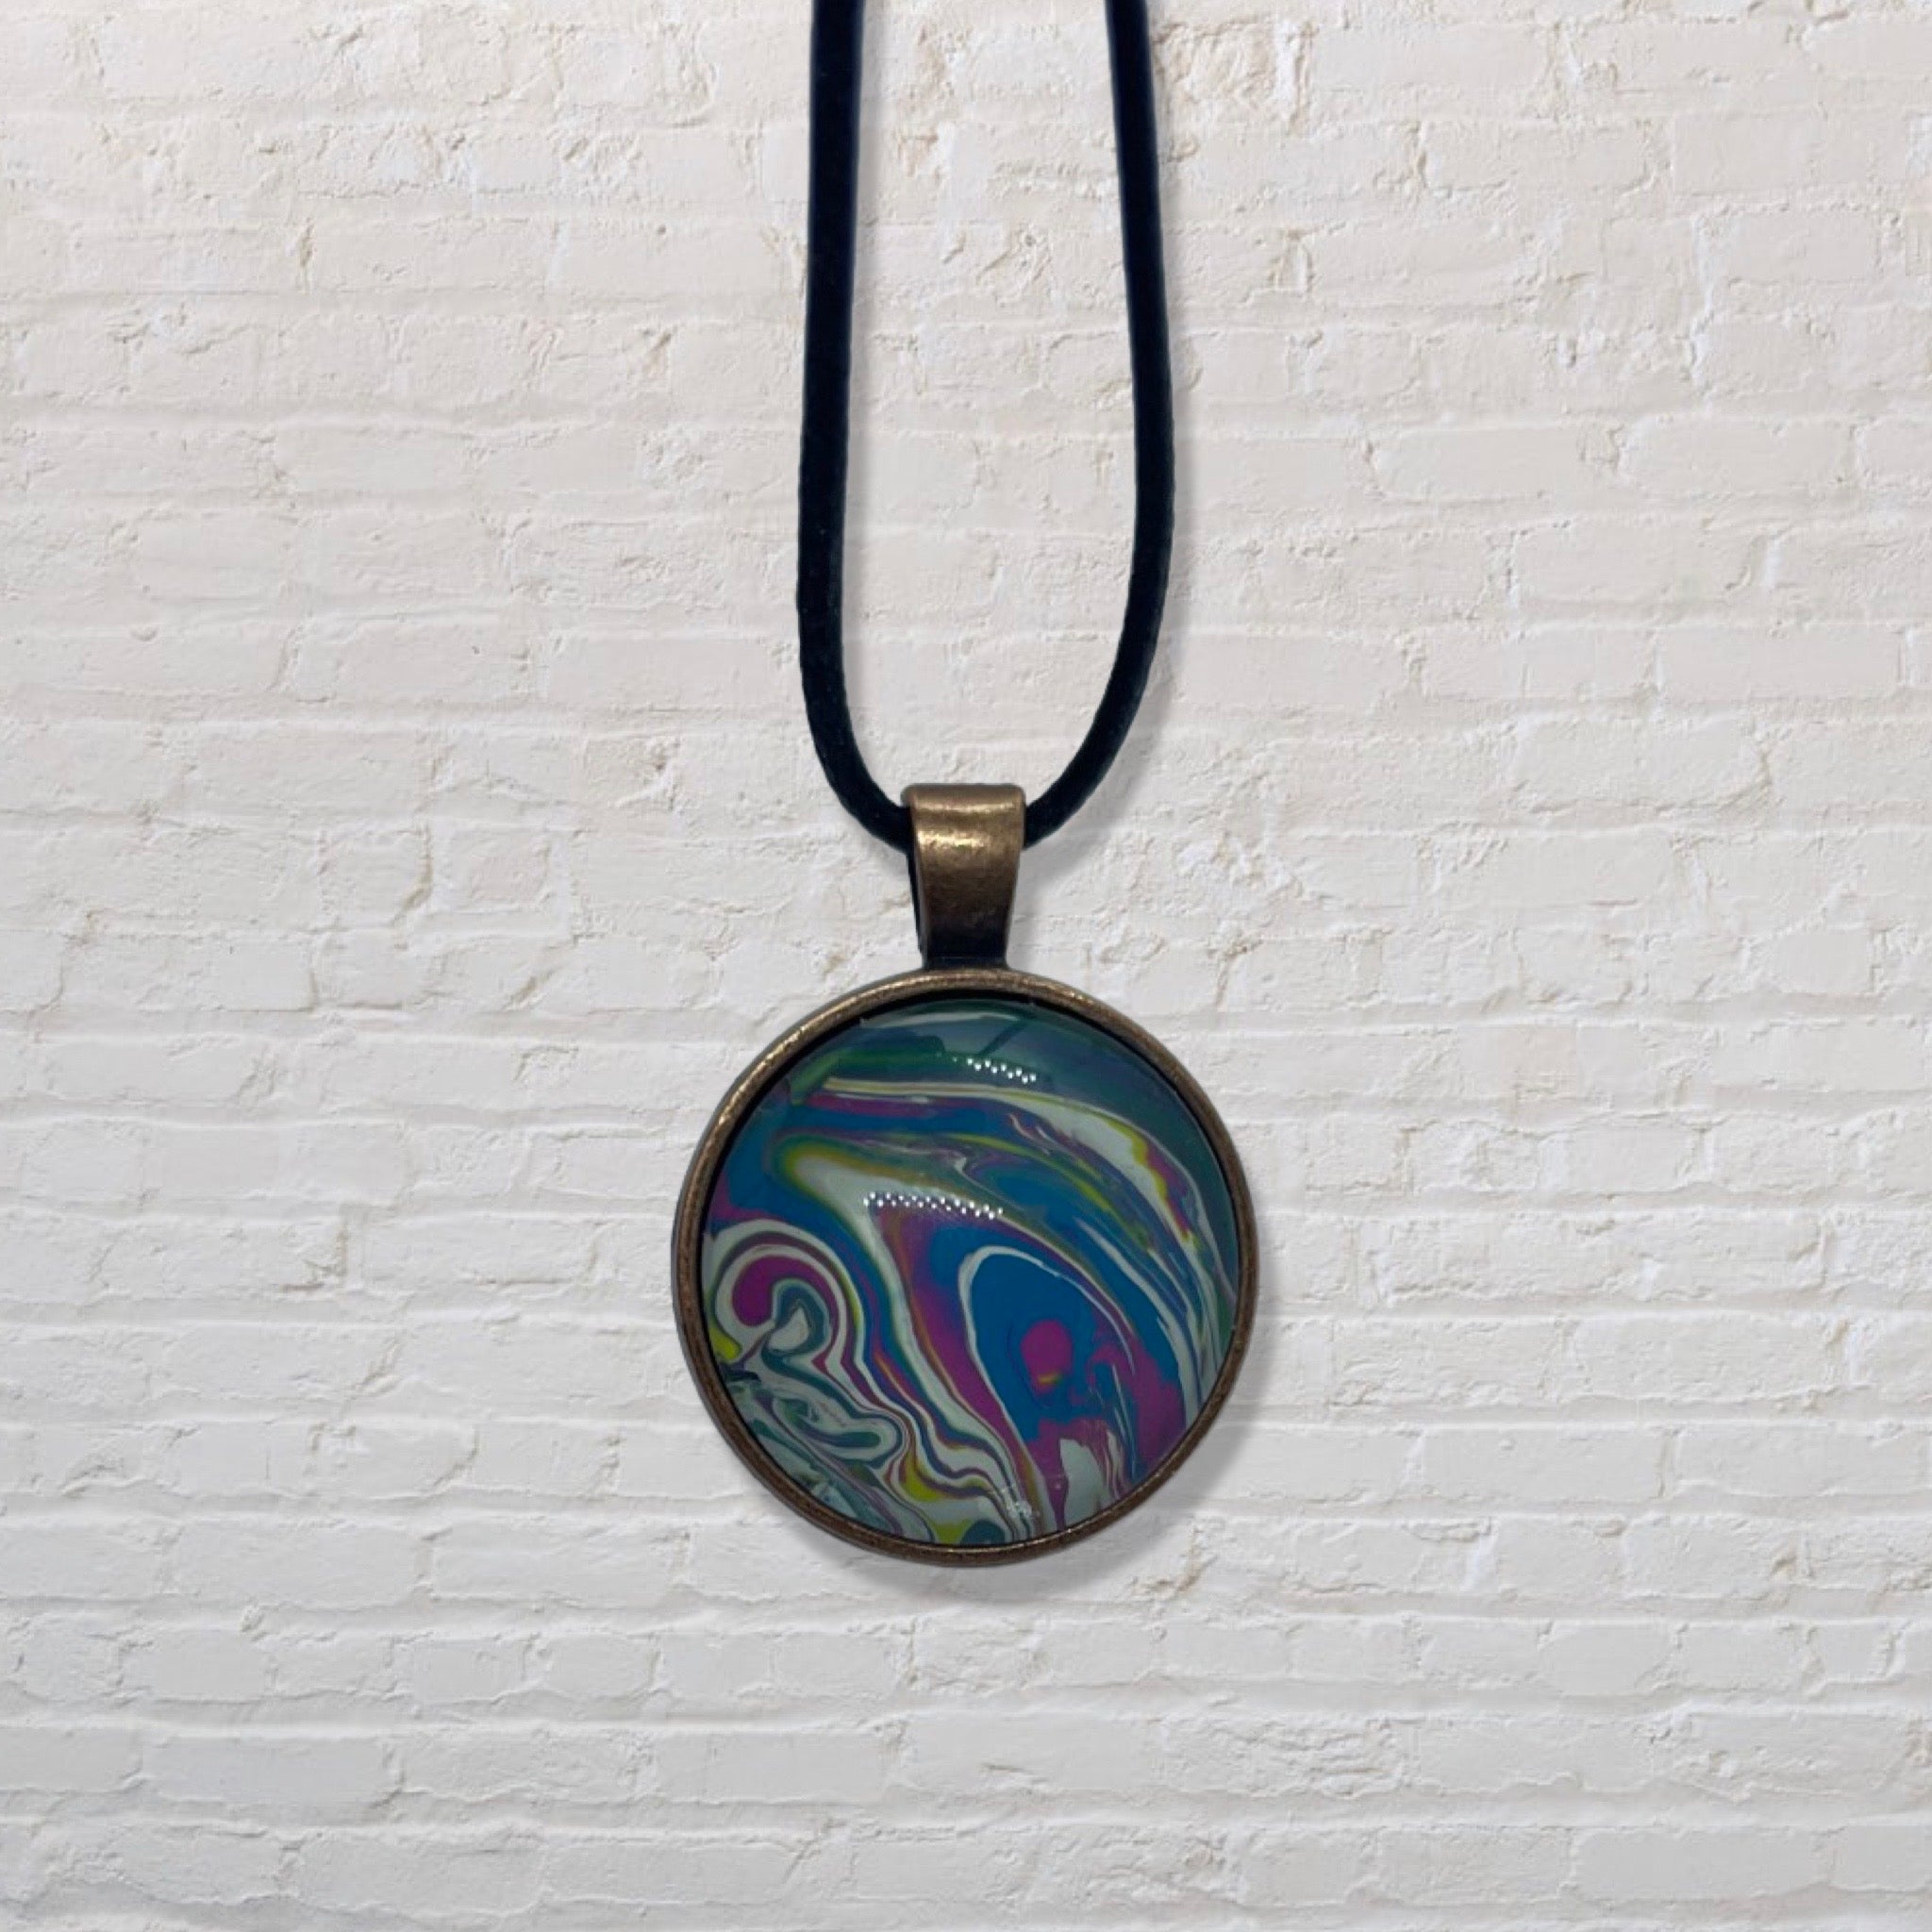 By The Kids -- Paint Pour Necklace - Blue, Pink and White